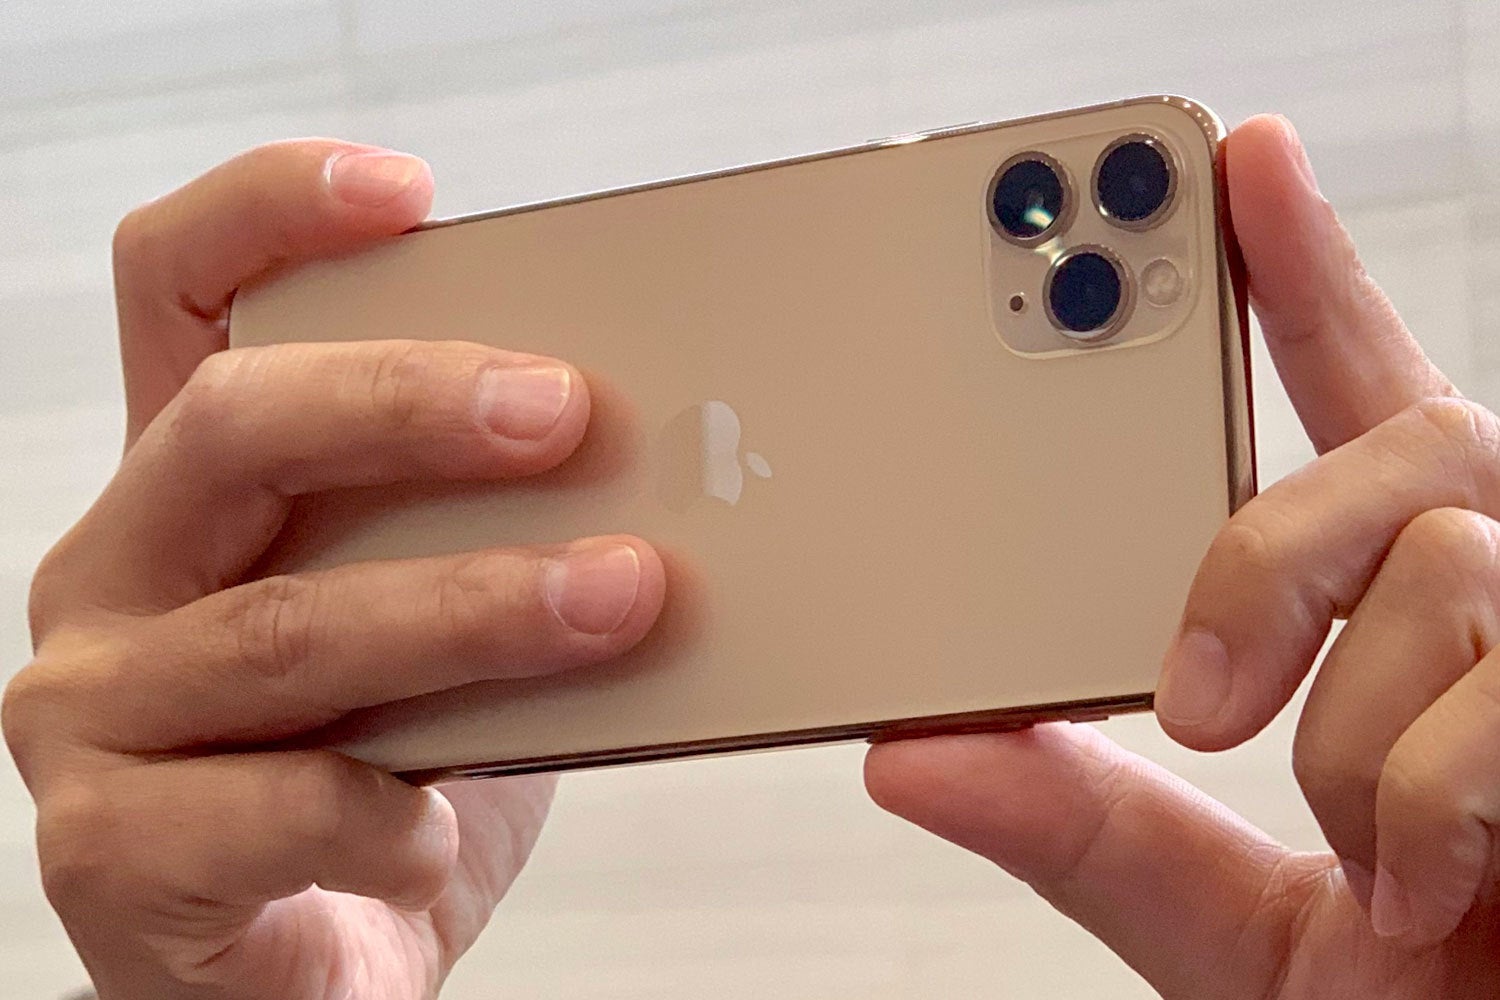 iPhone 12 preview: New design, colors, and sizes, 5G, and no earbuds